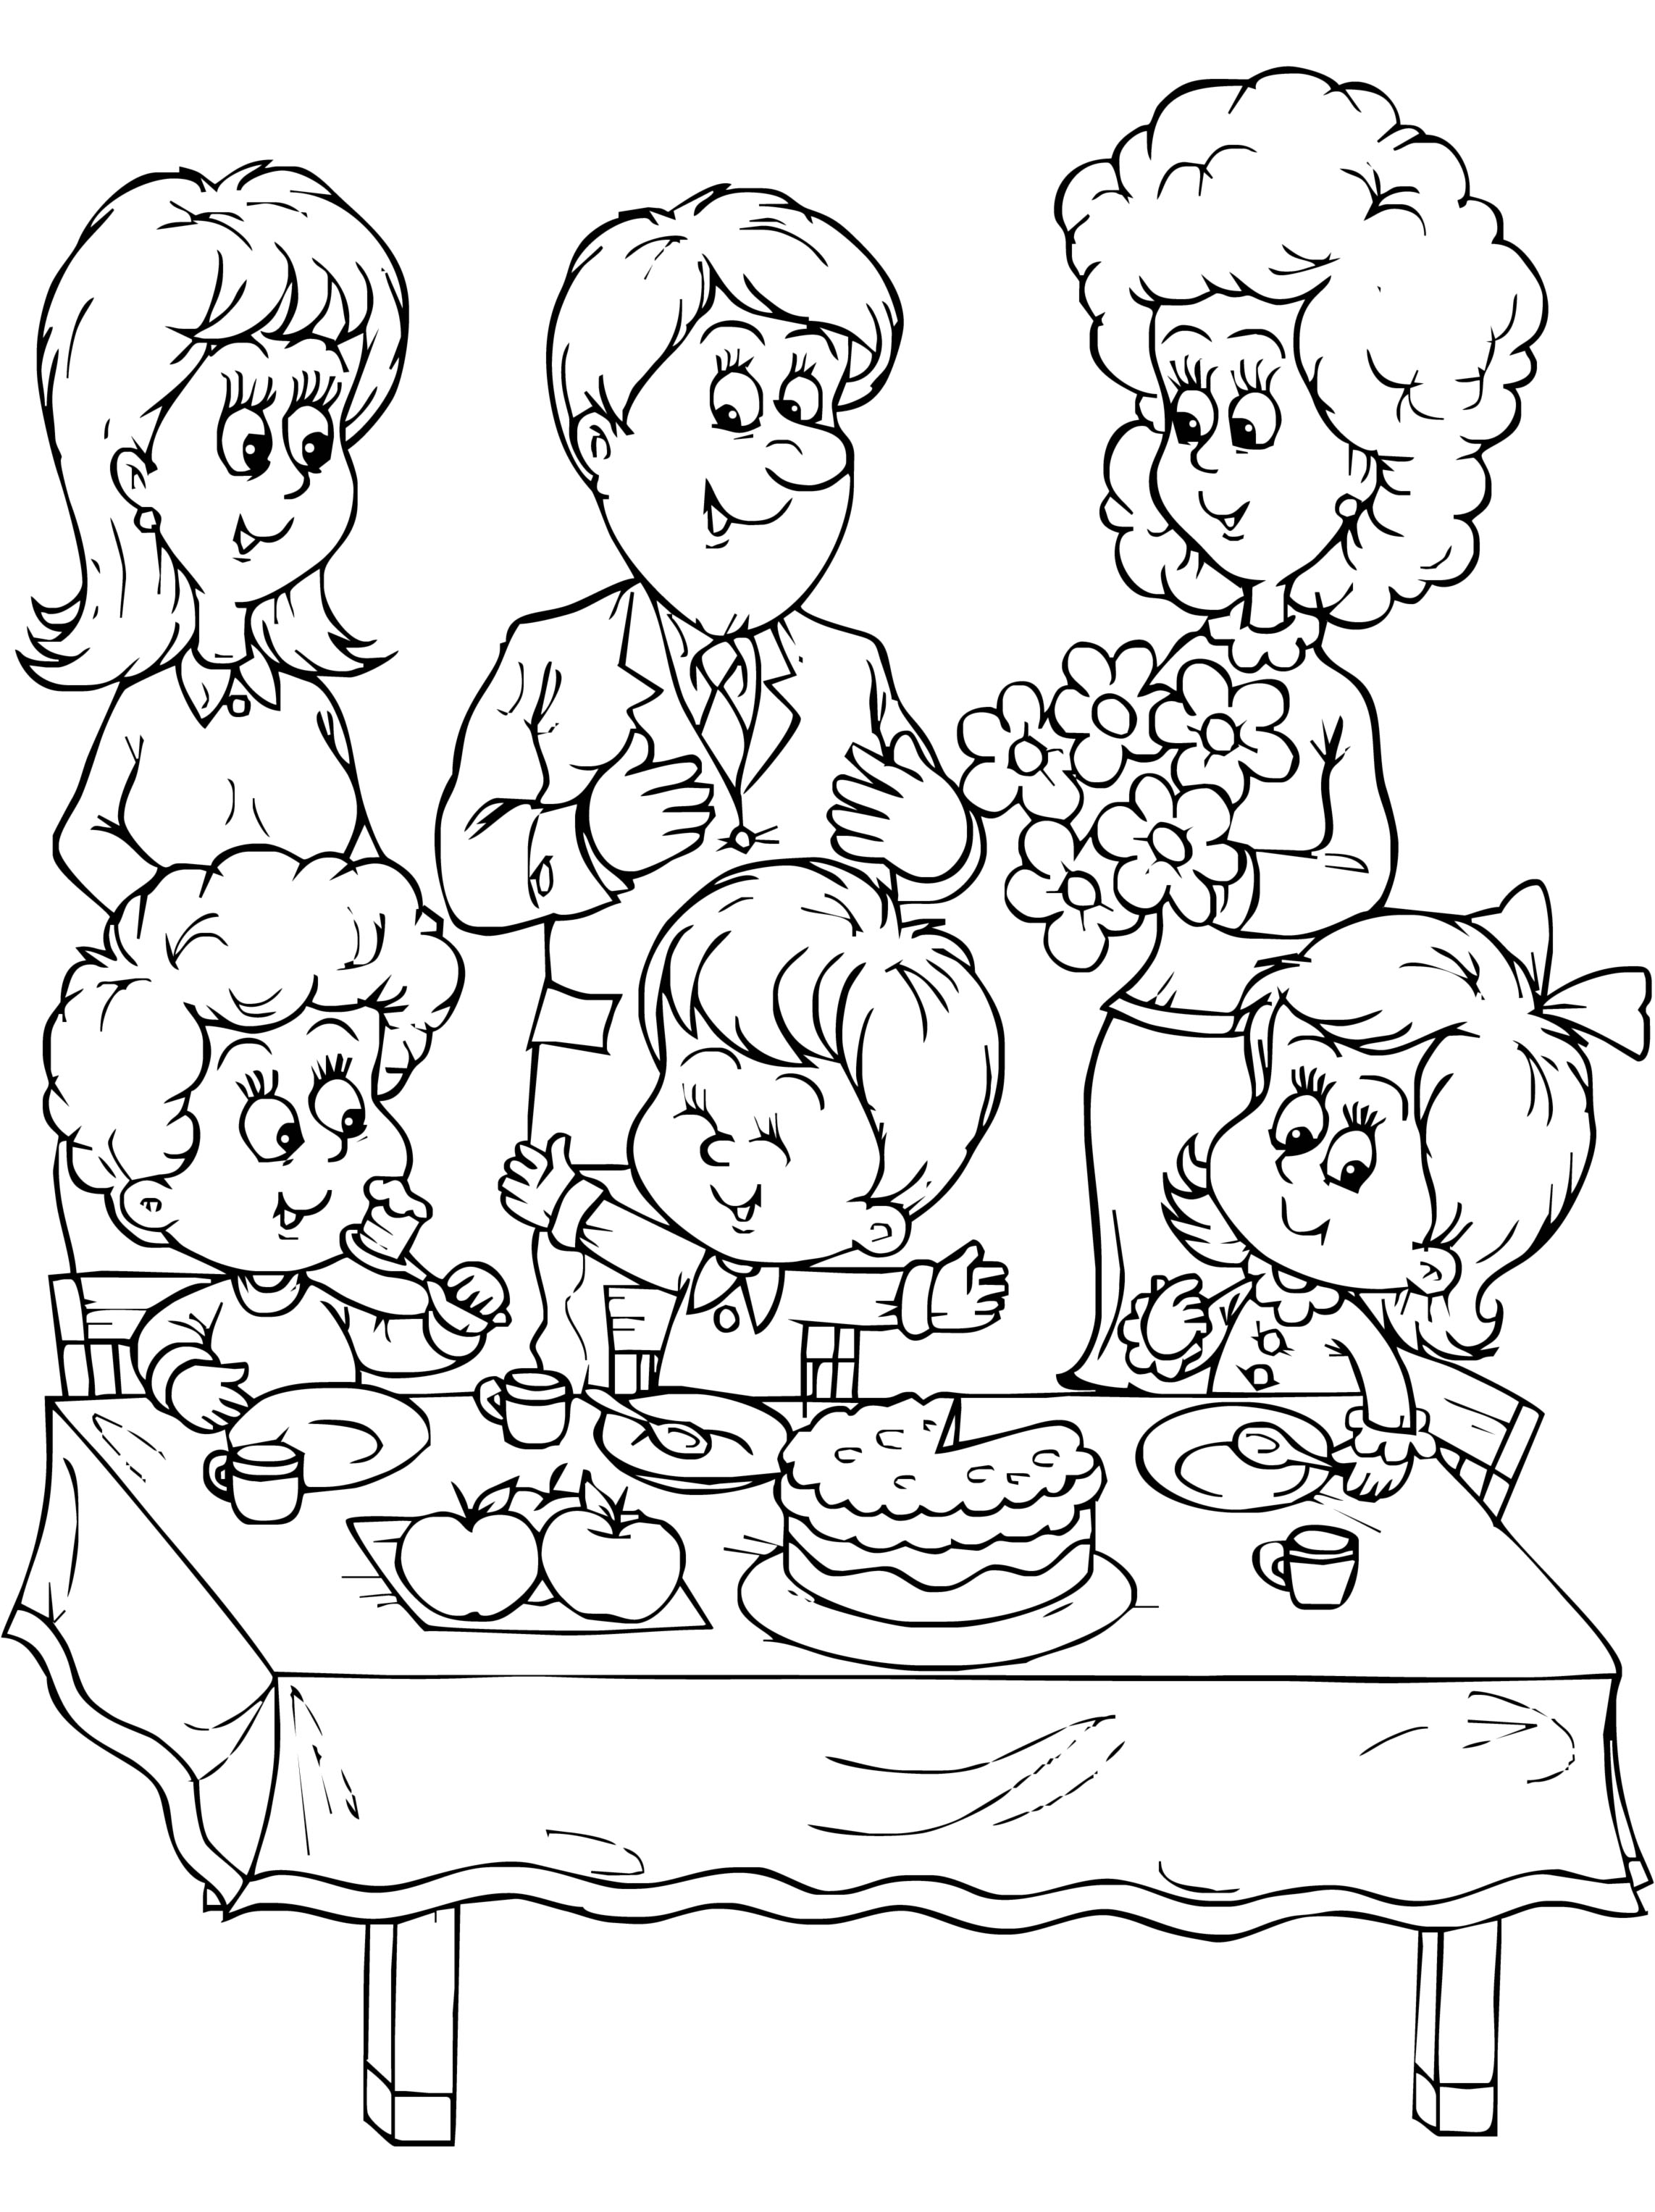 Family Coloring Pages - Best Coloring Pages For Kids